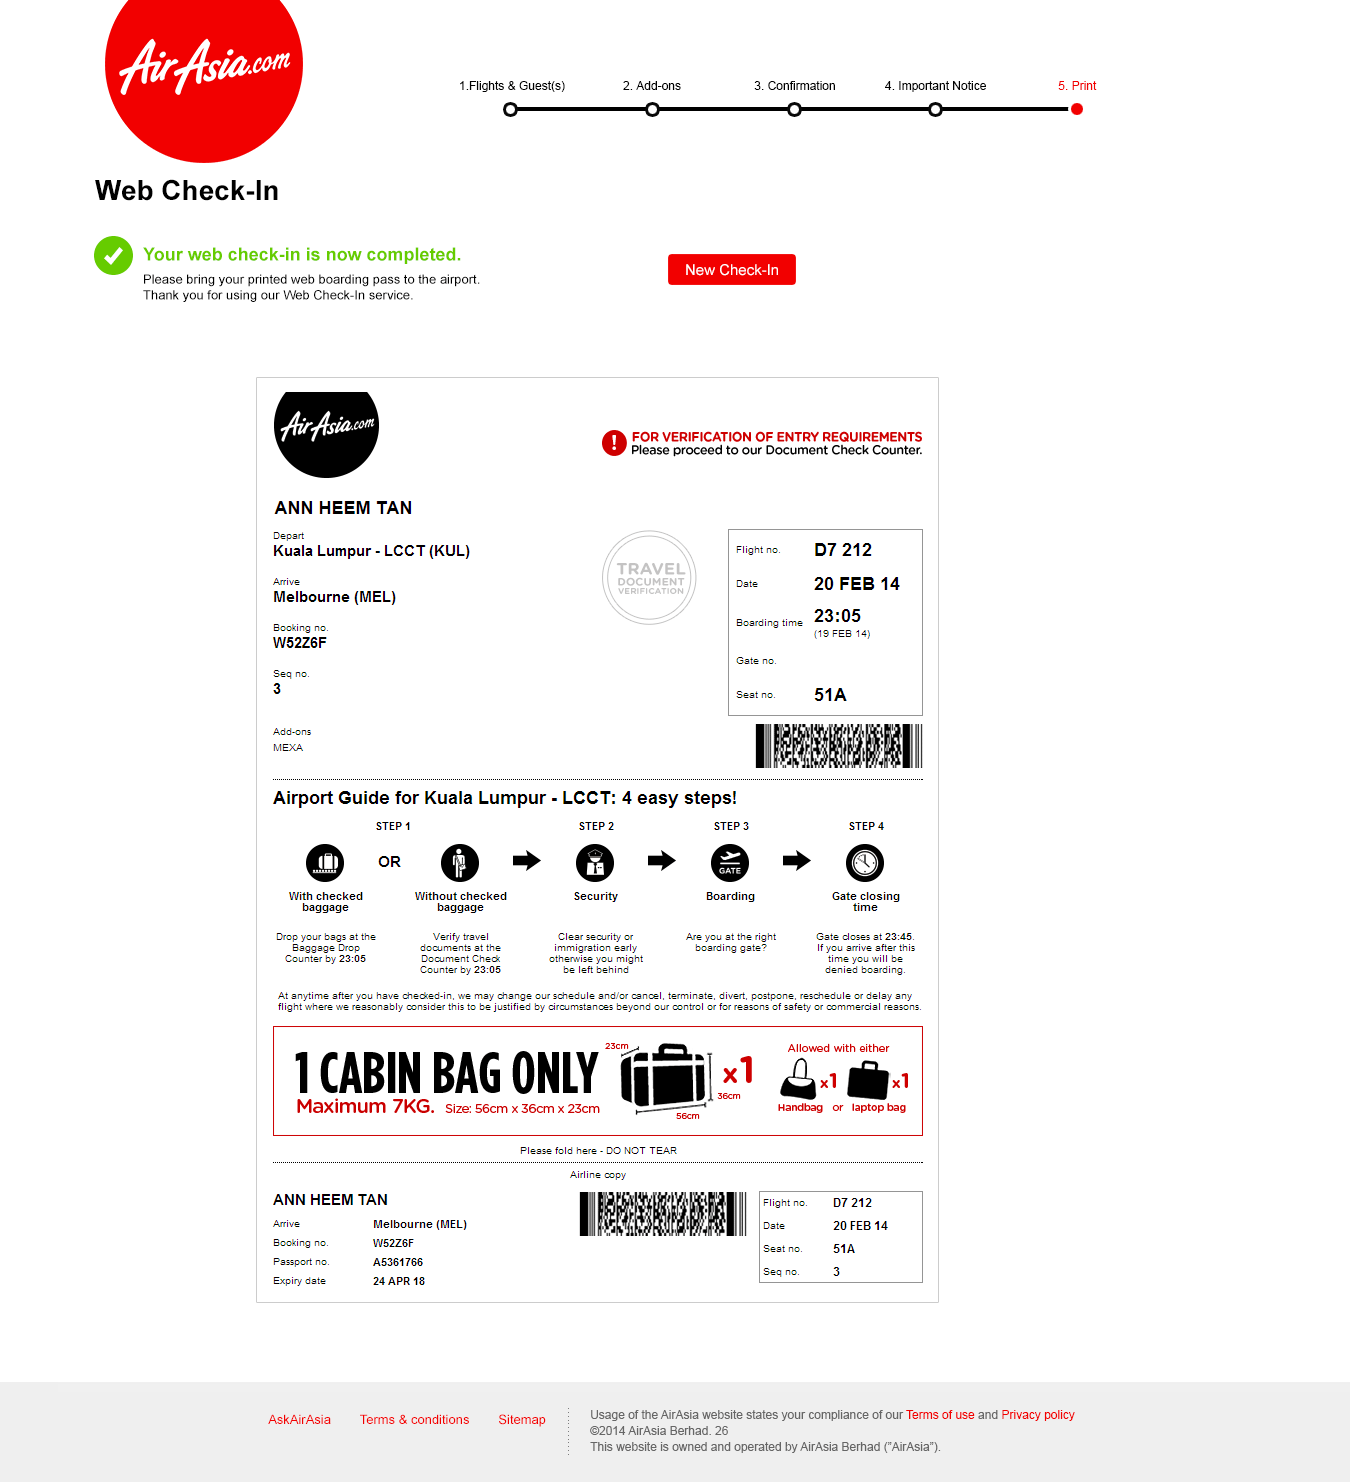 Web Check-in is now completed screen